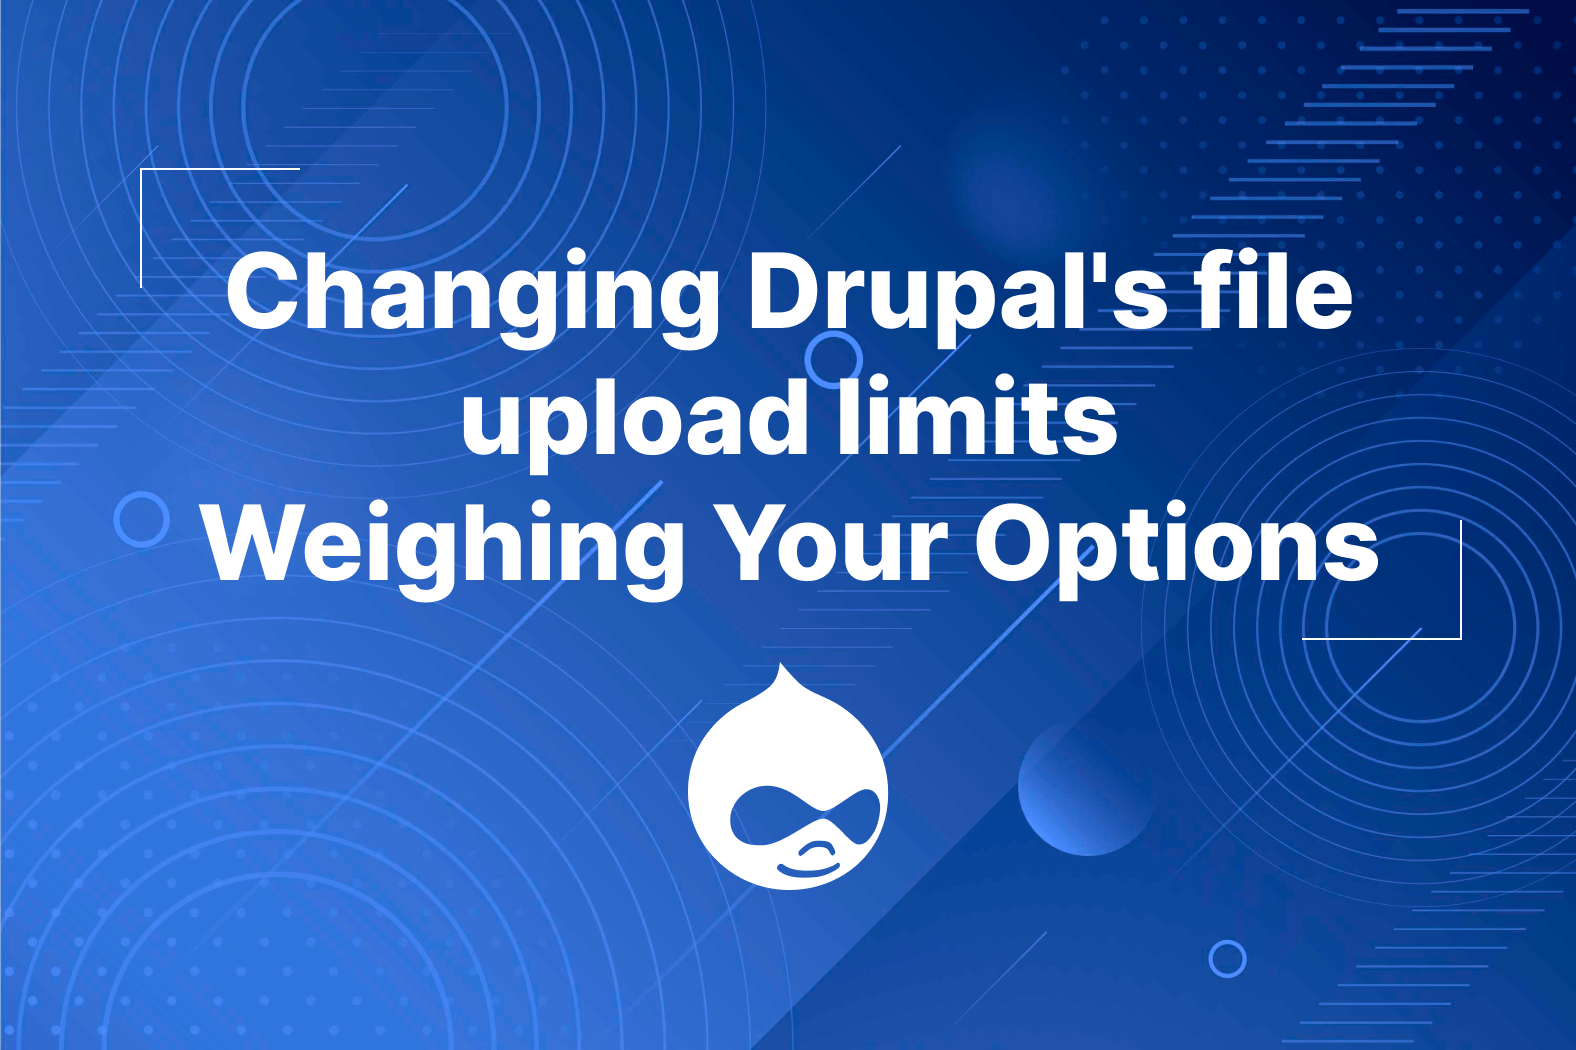 Changing Drupal's file upload limits: Weighing Your Options image